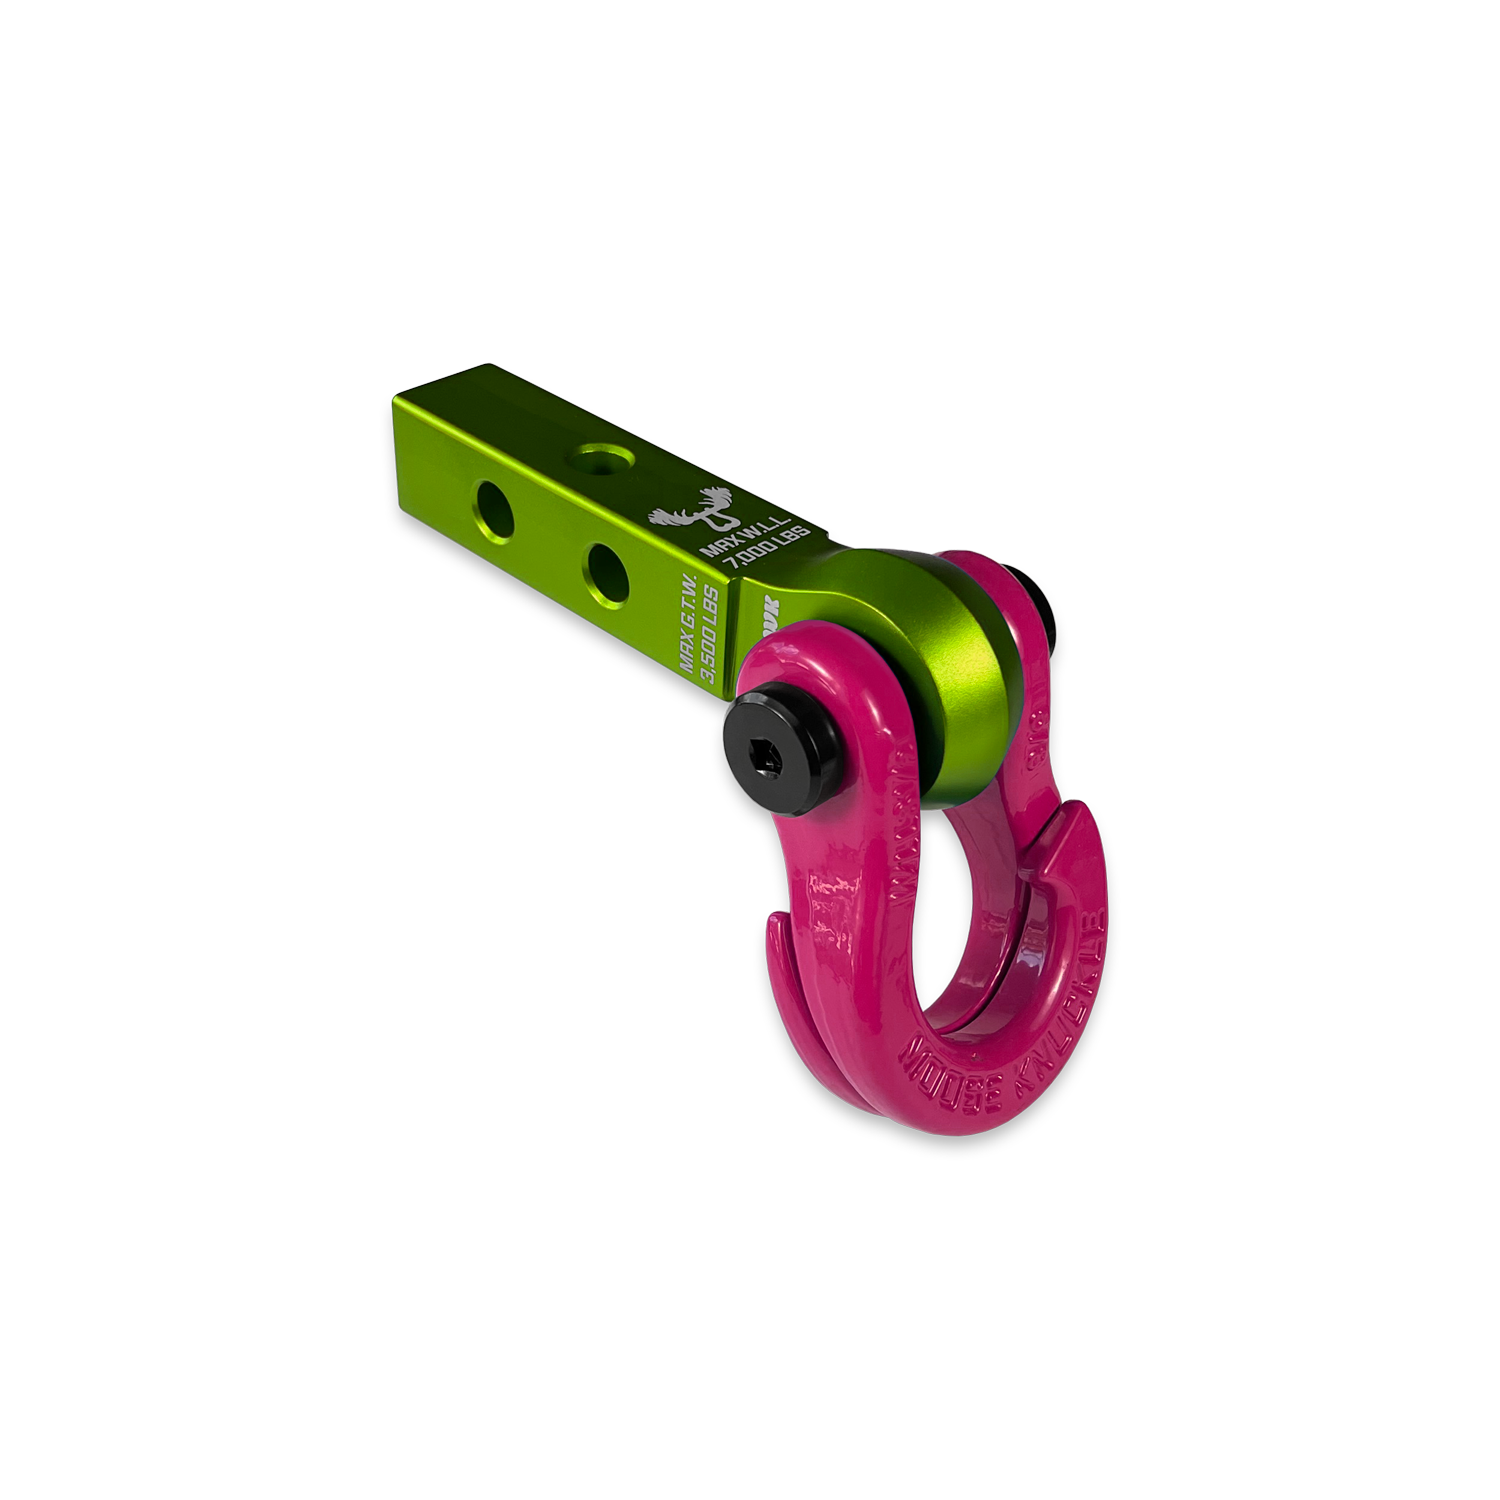 Jowl 5/8 Split Shackle & 1.25 Receiver (Bean Green and Pogo Pink)